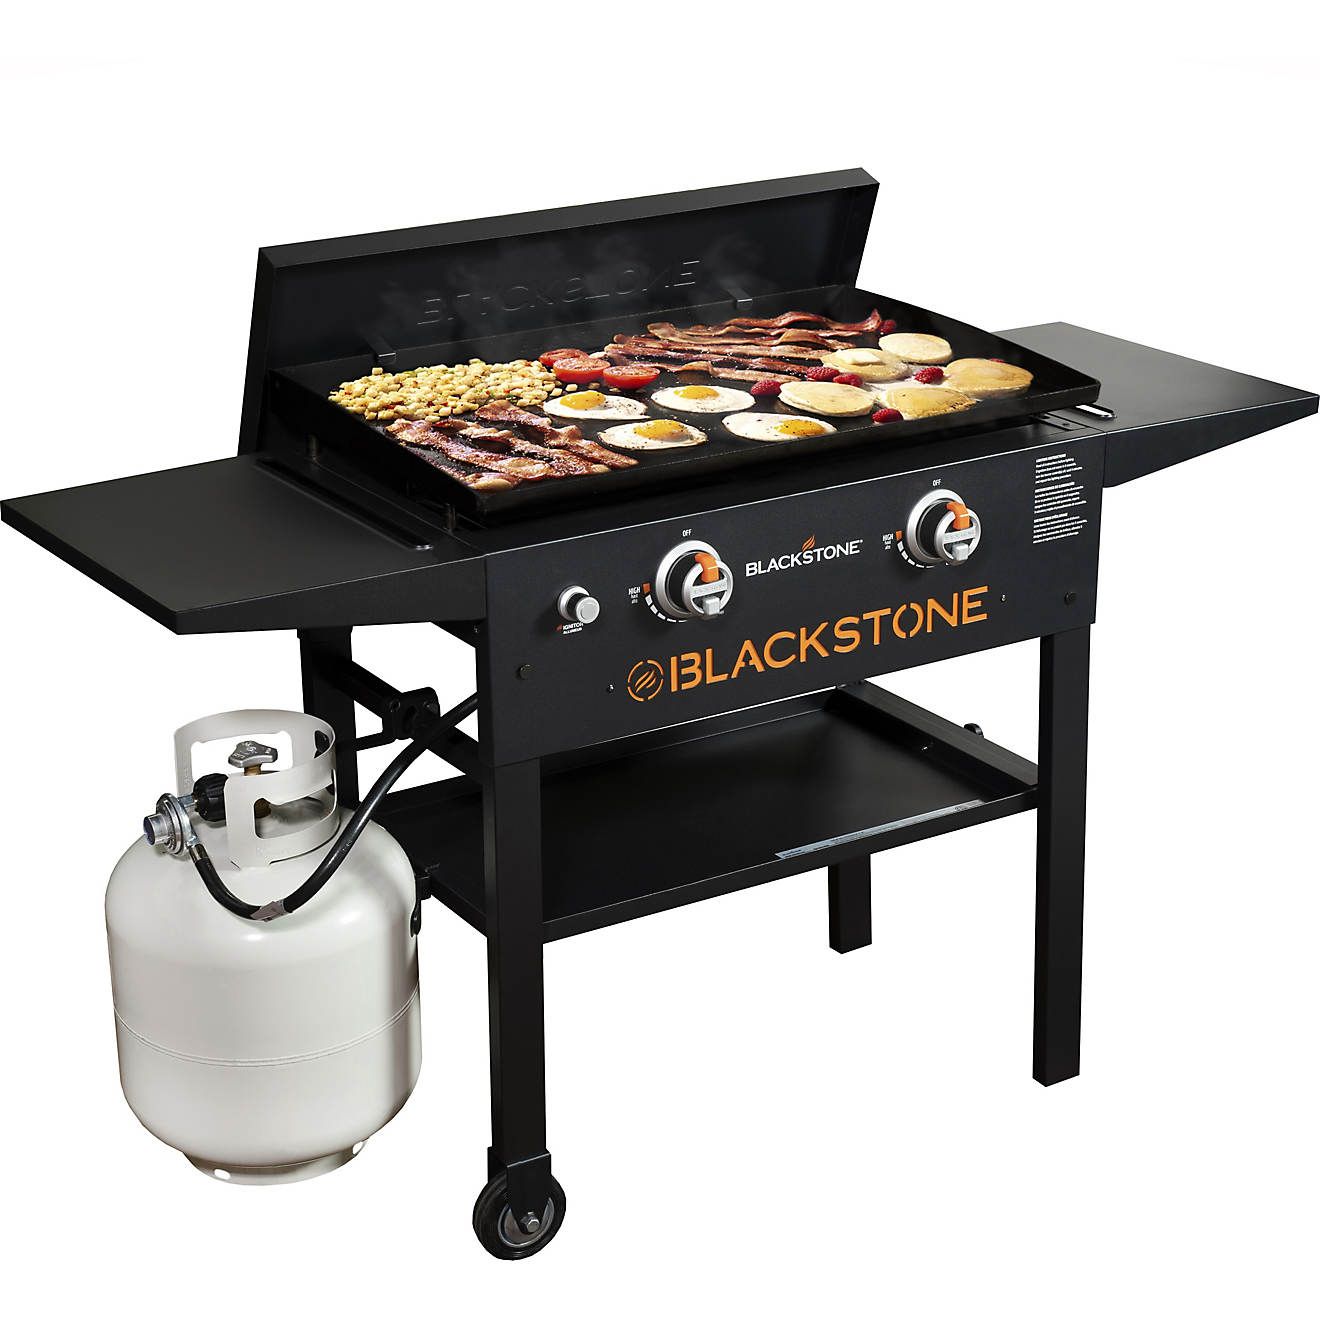 Blackstone 28 in Griddle Cooking Station with Hard Cover | Academy | Academy Sports + Outdoors